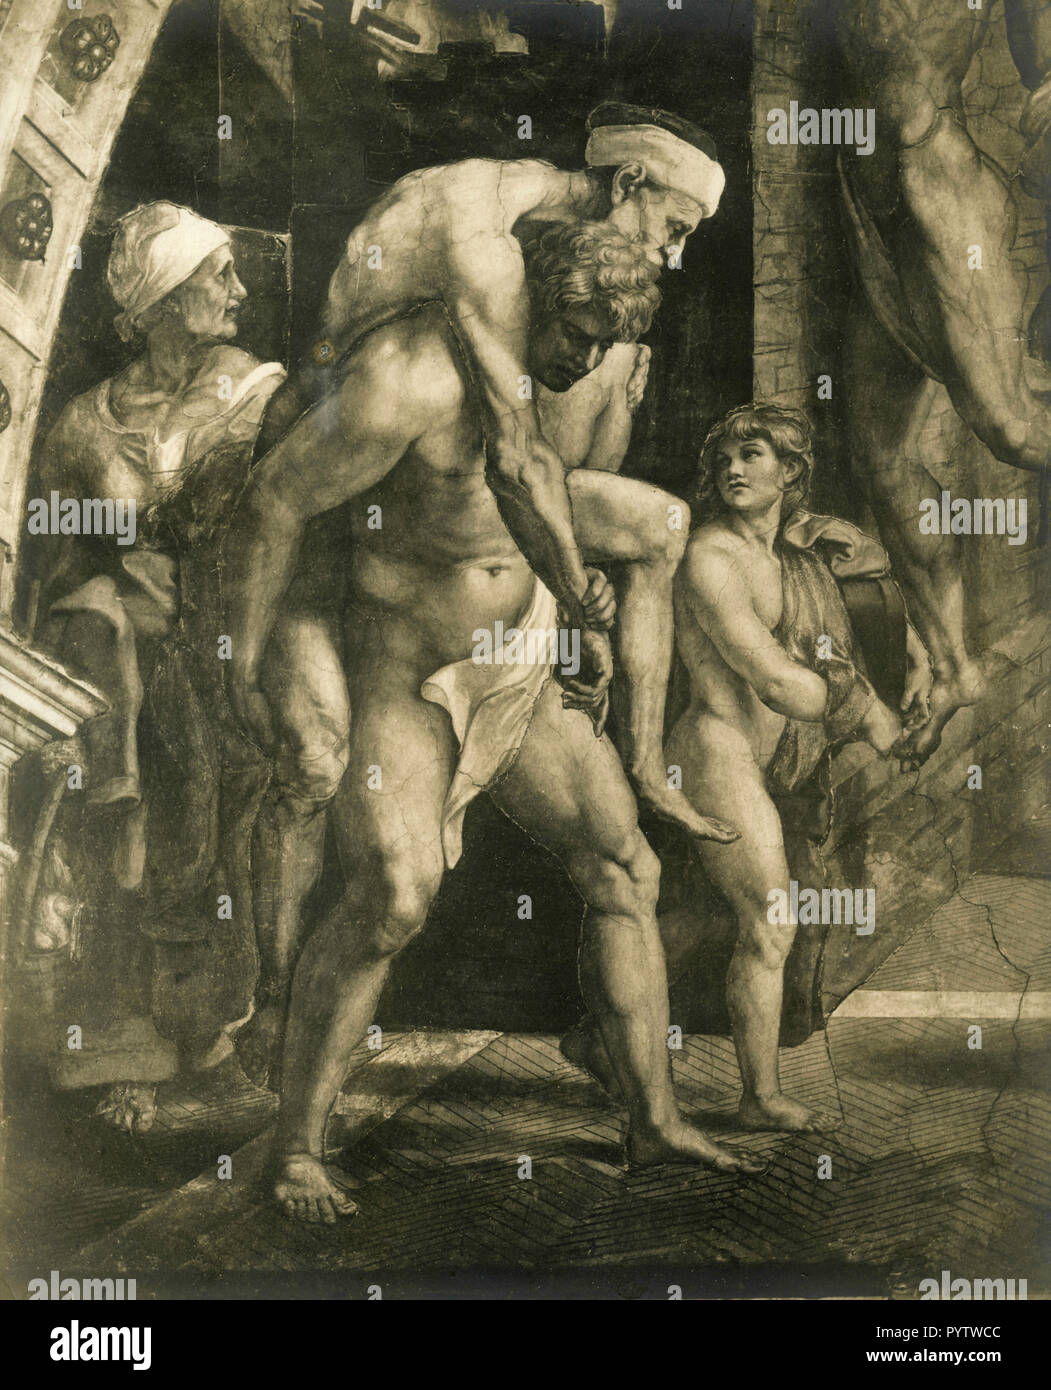 The Fire in Borgo, detail of the fresco by Raphael, Apostolic Palace, Vatican City 1930s Stock Photo